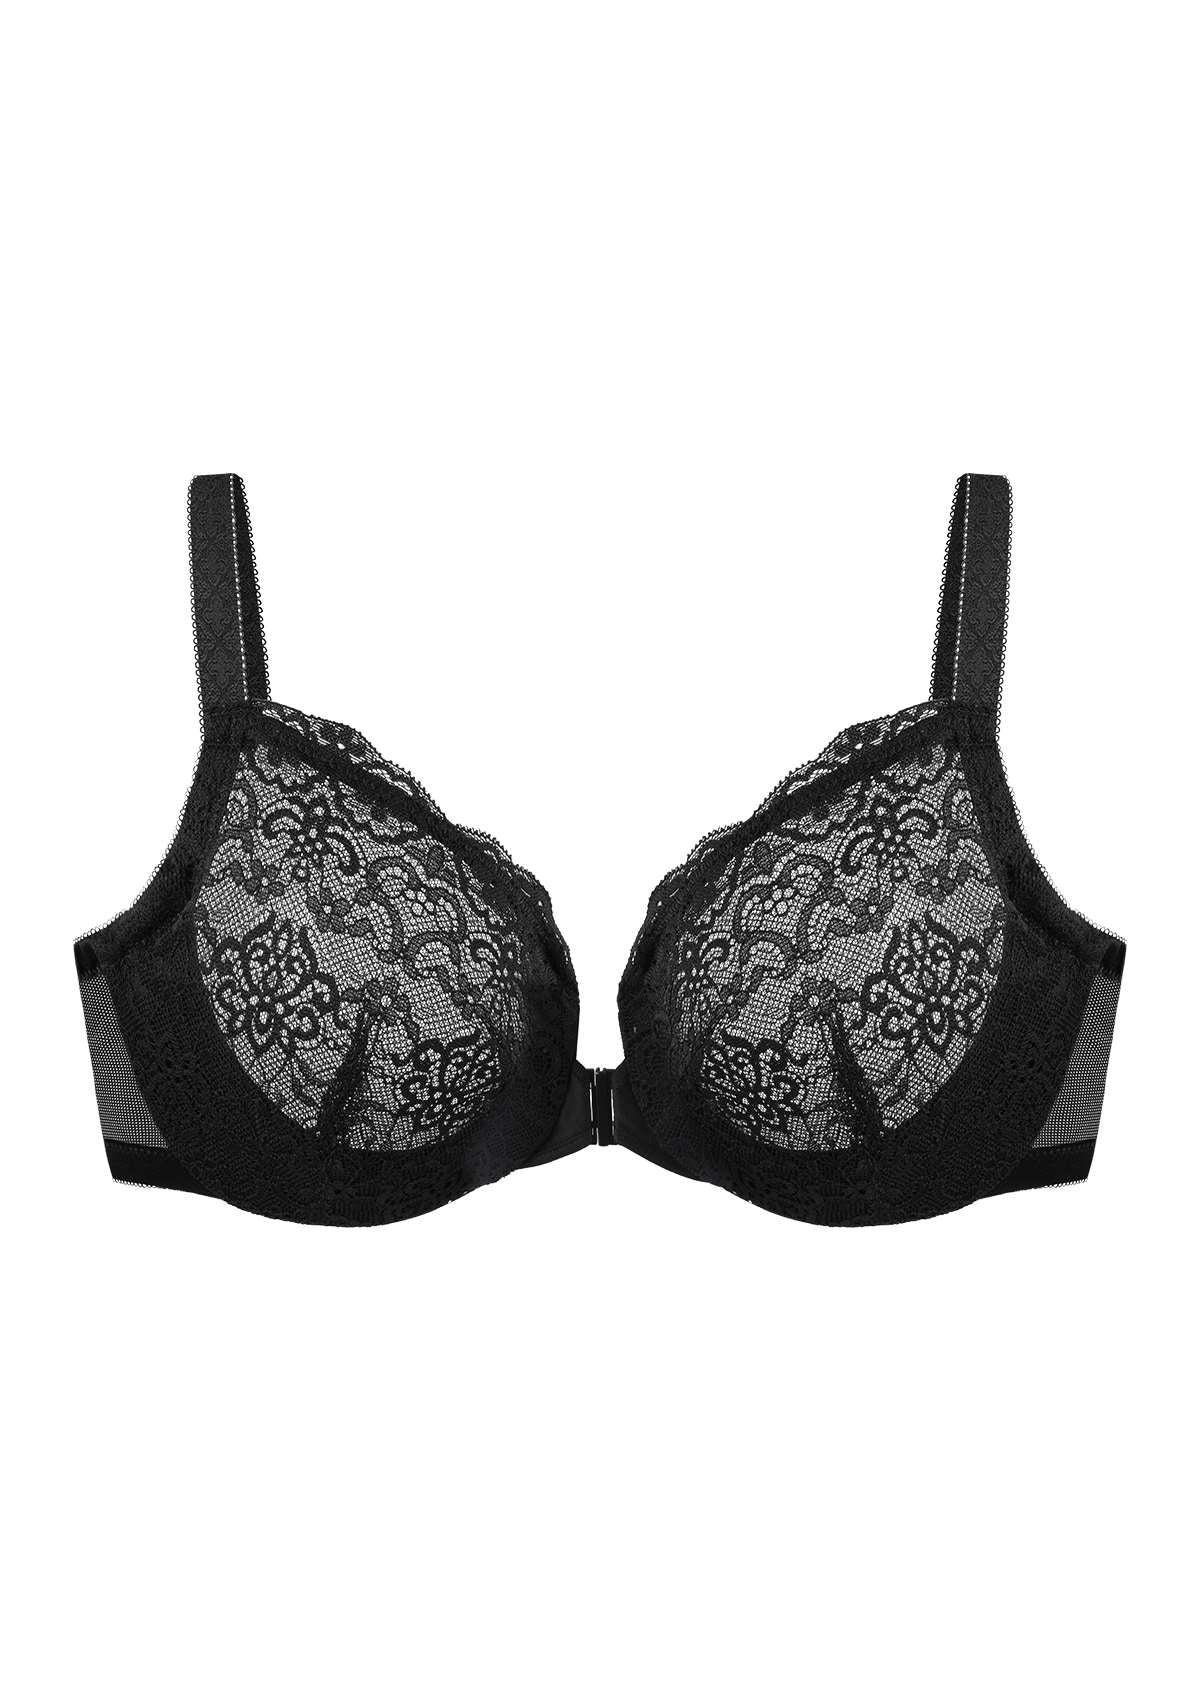 HSIA Nymphaea Front-Close Unlined Retro Floral Lace Back Smoothing Bra - Black / 34 / C